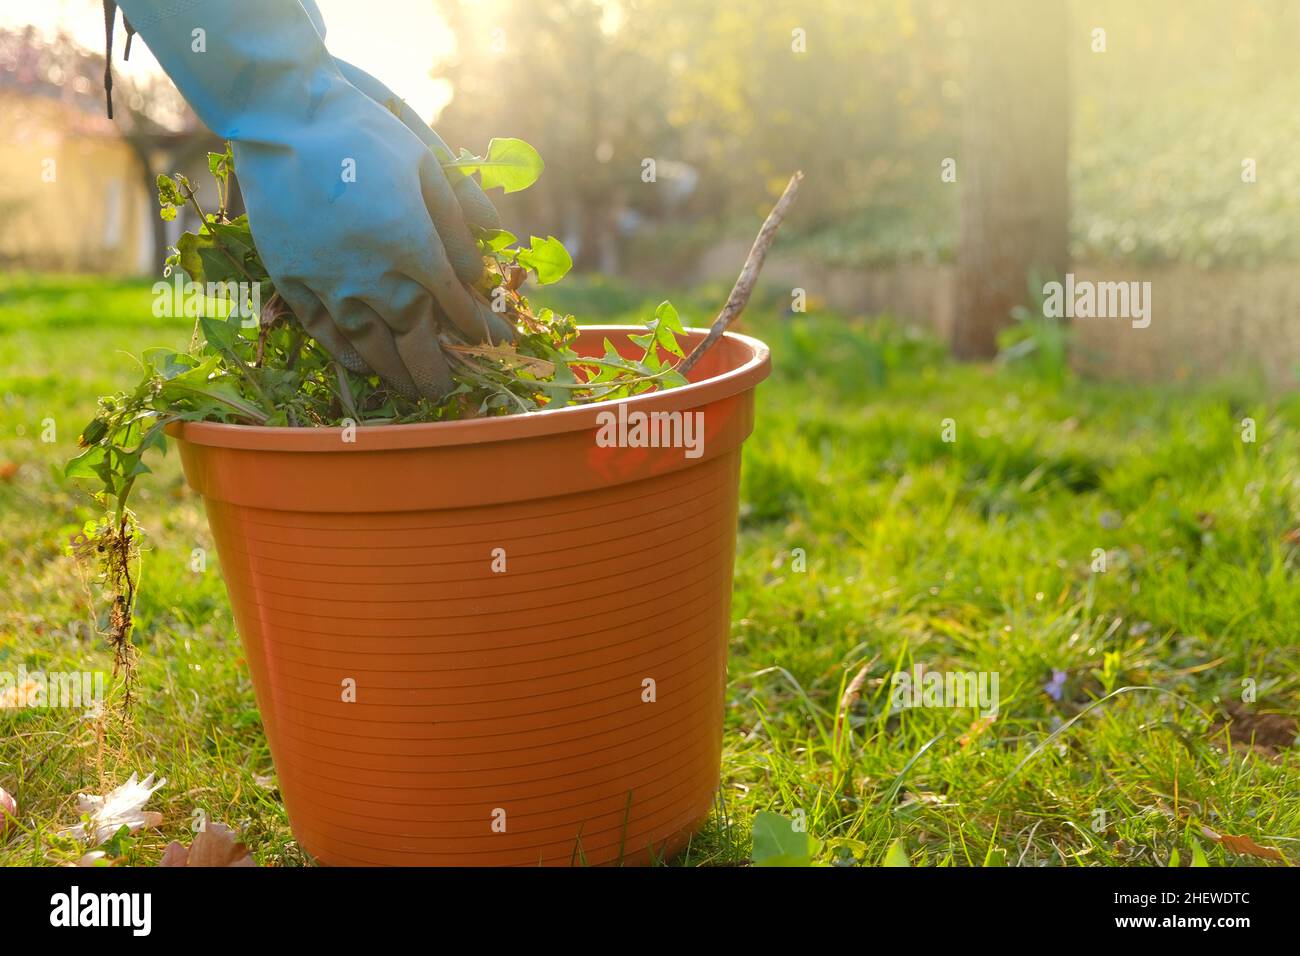 Removing weeds in the garden.Dandelion removal. Cleaning the garden in the spring.Hands in gloves fold last weeds in a bucket on spring garden Stock Photo